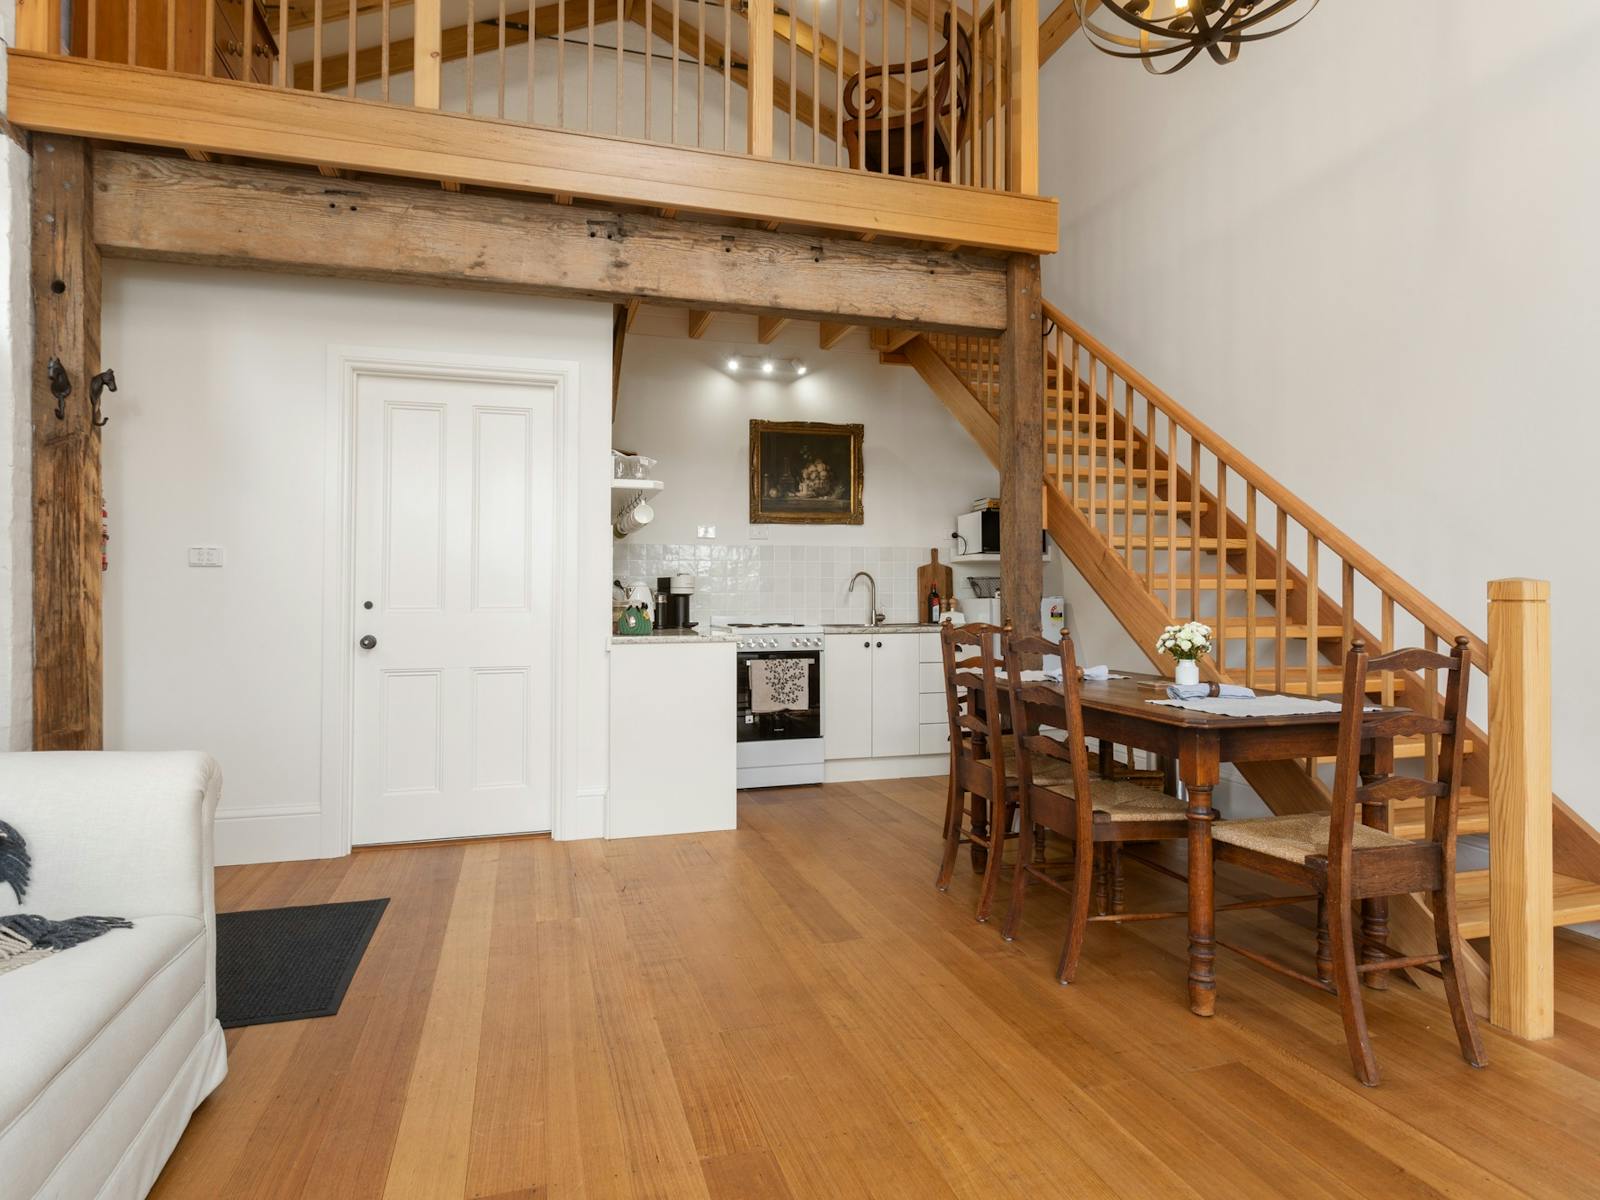 wooden floors in downstairs lounge dining area showing wooden stairs leading to loft bedroom